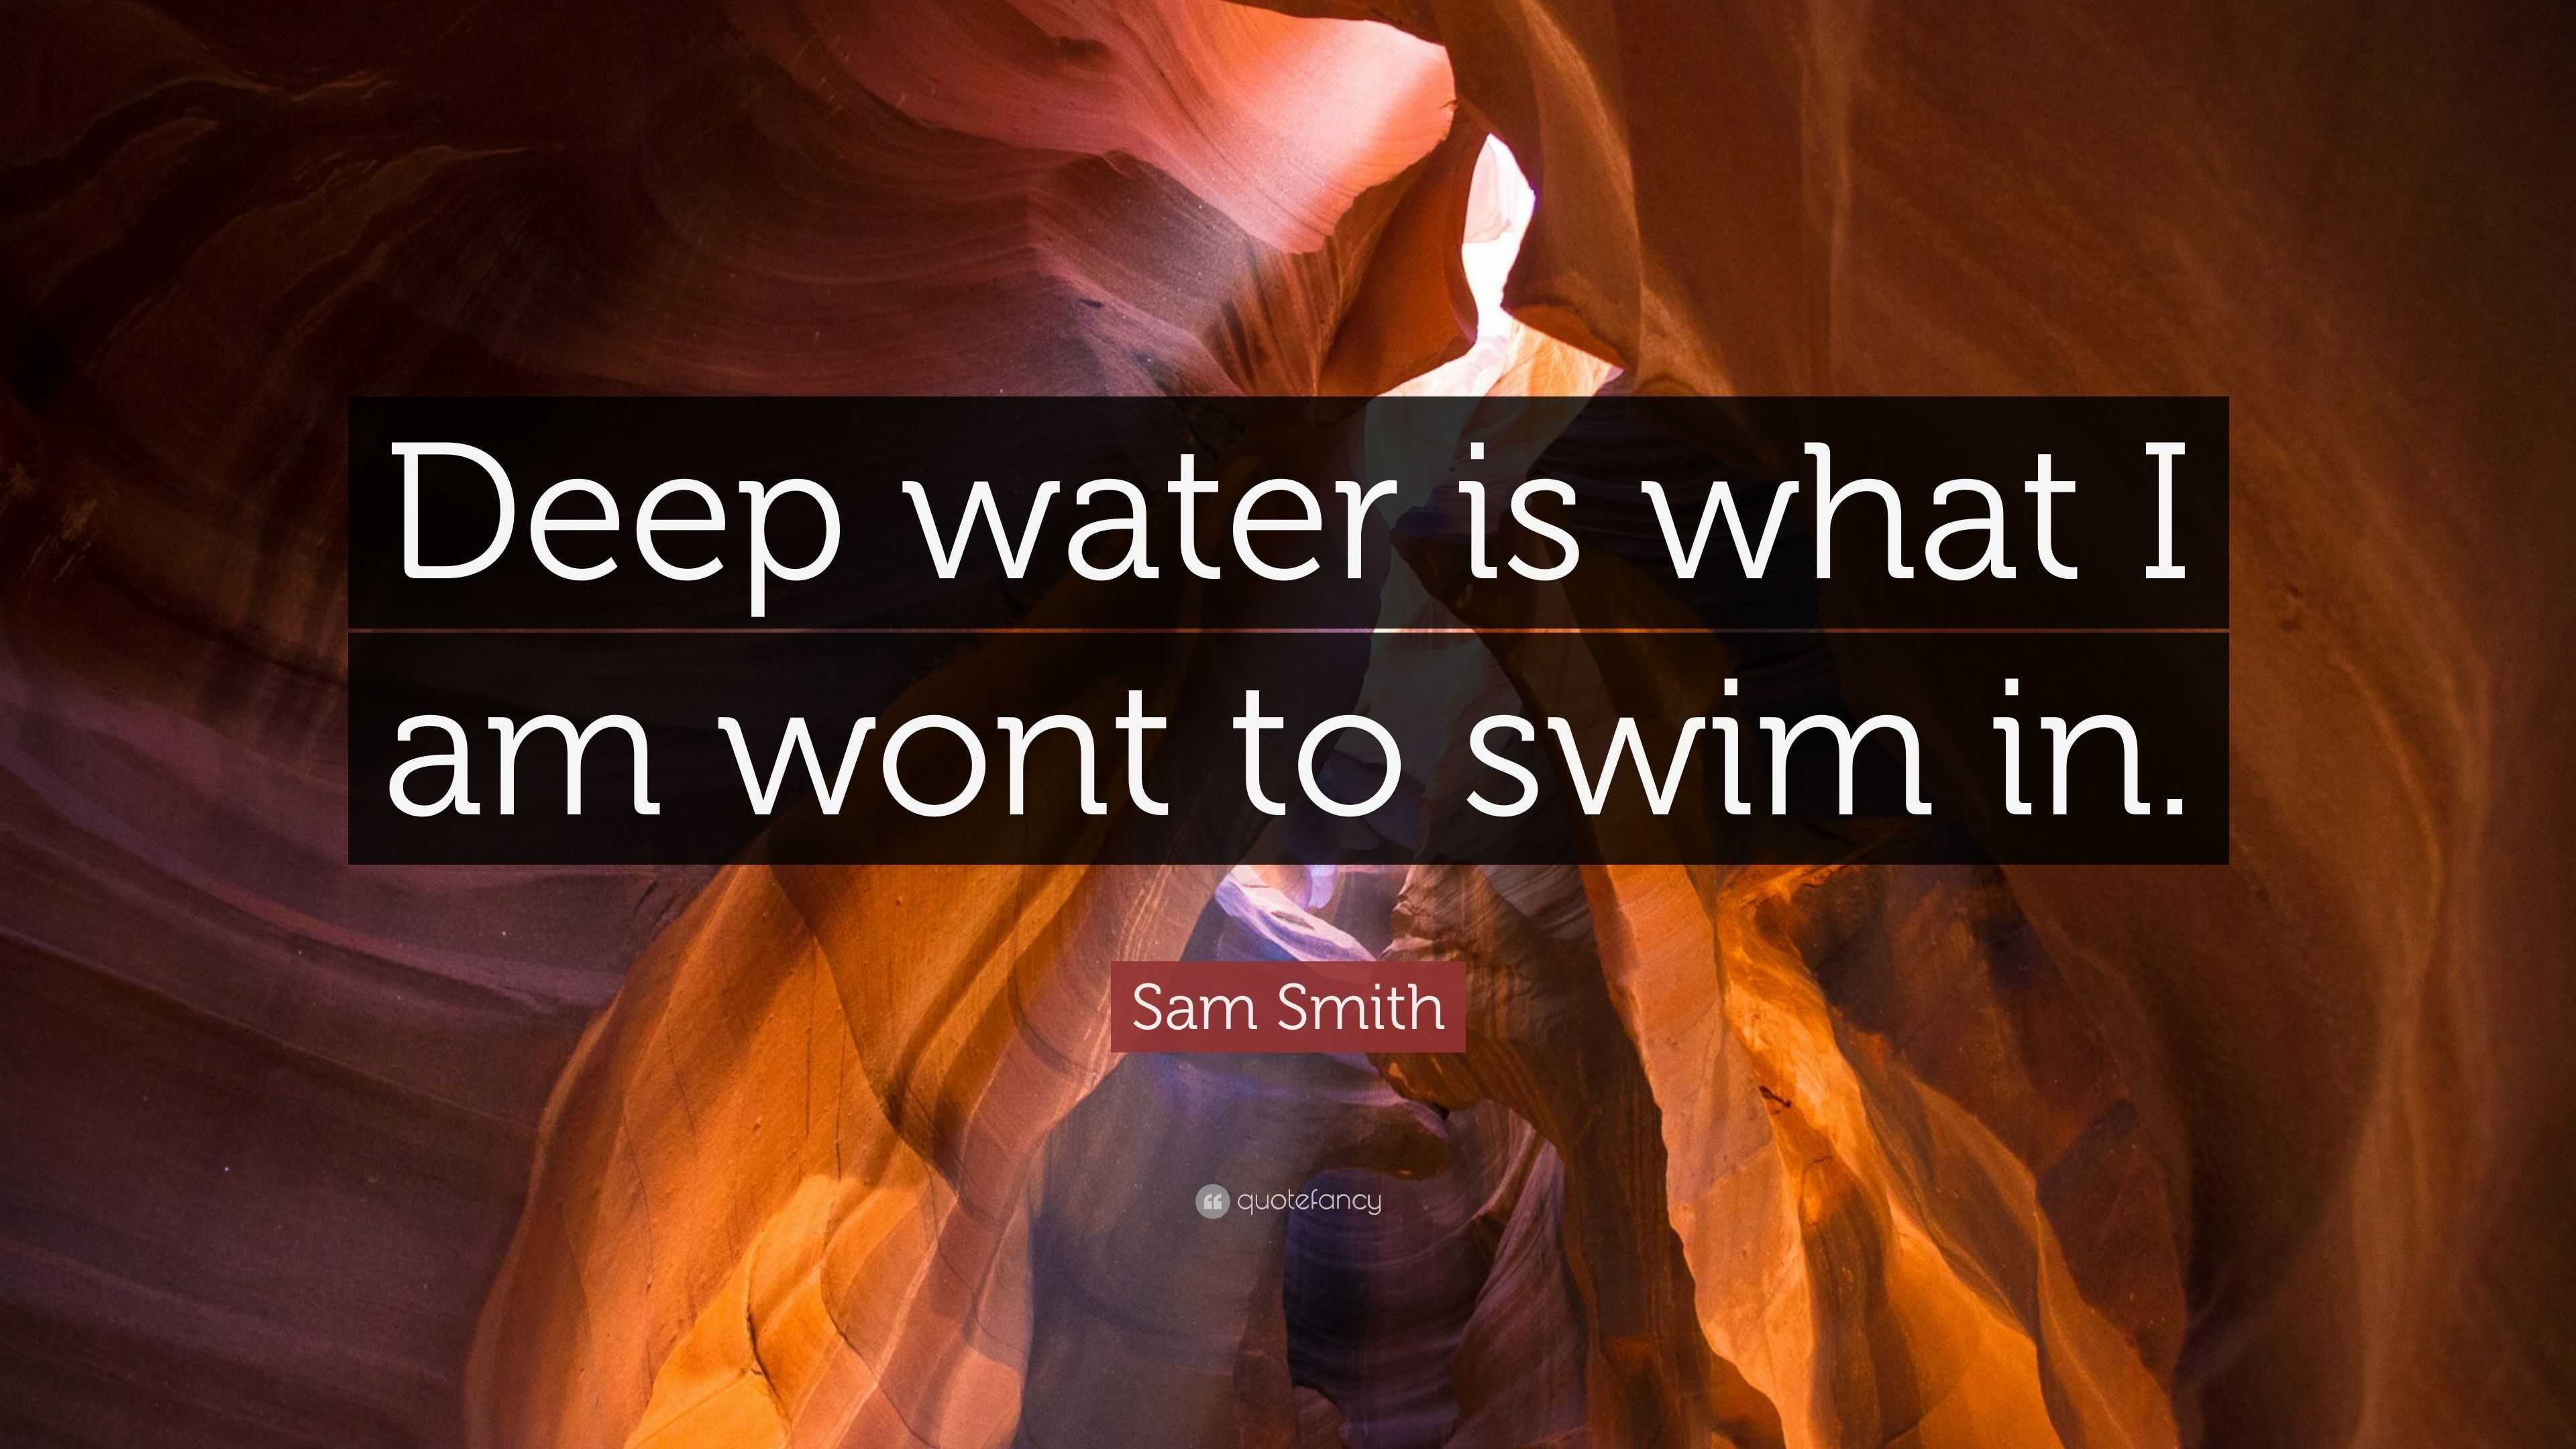 Sam Smith Quote: “Deep water is what I am wont to swim in.”